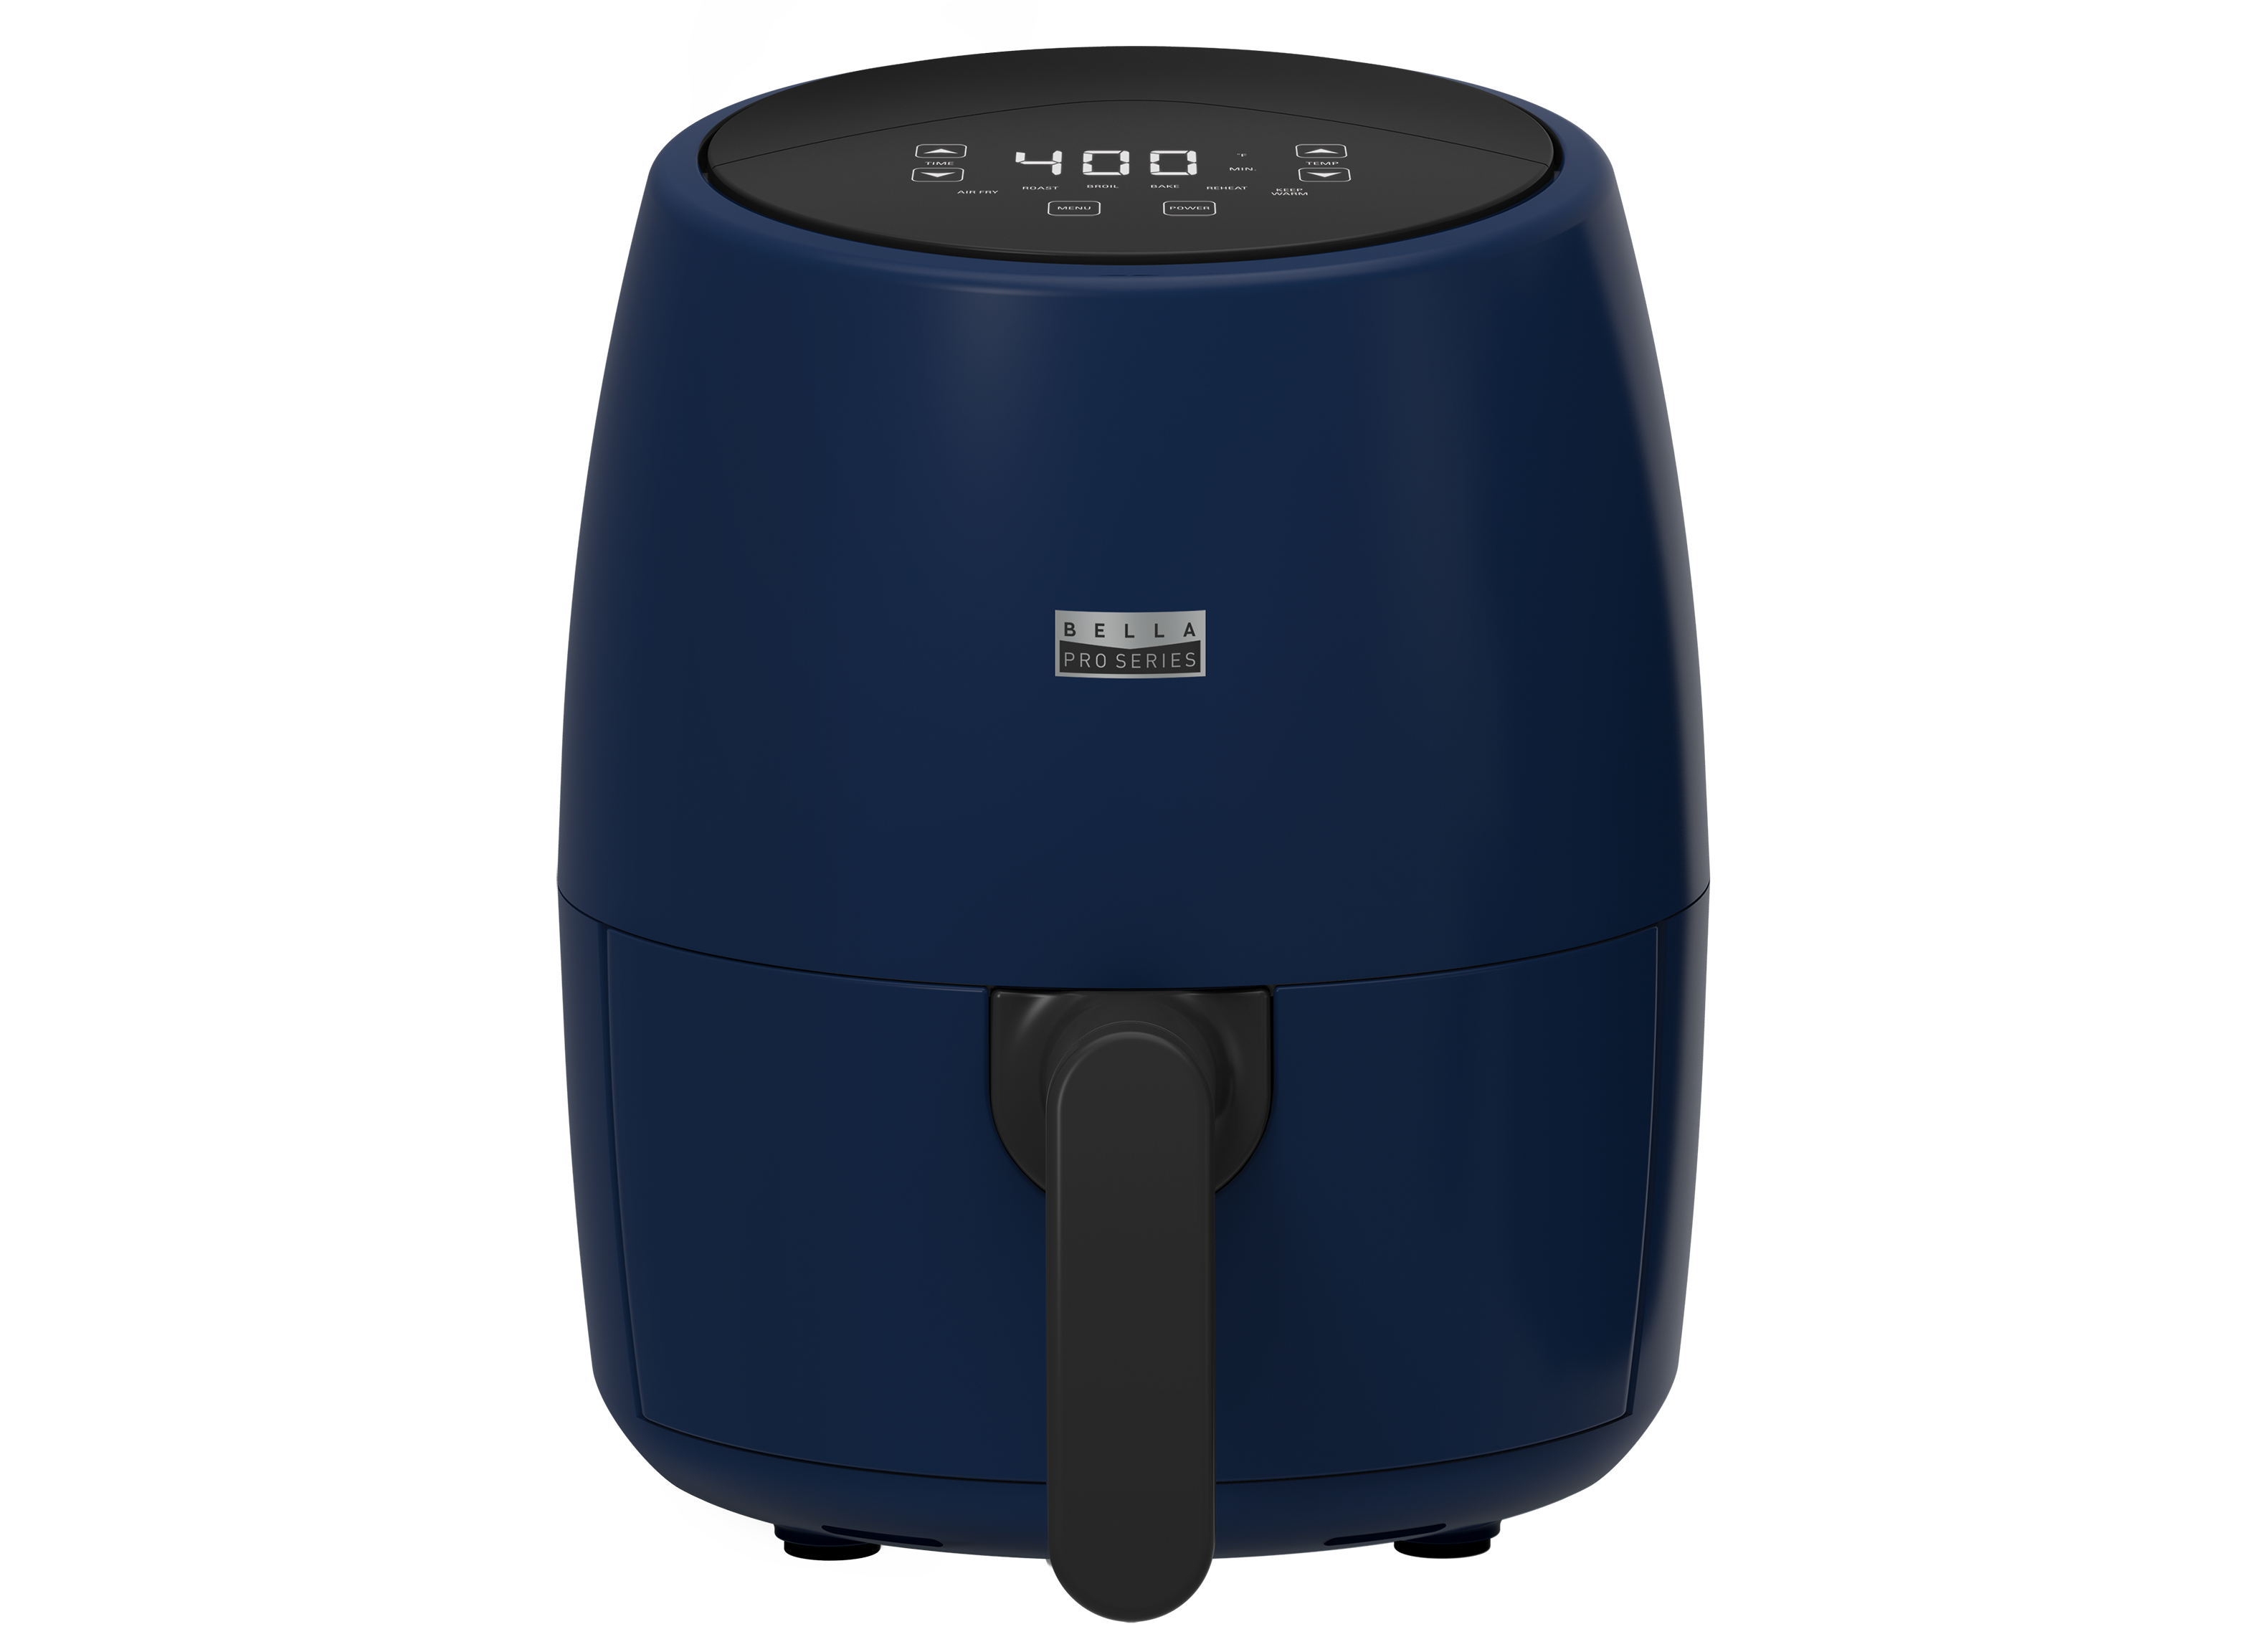 https://crdms.images.consumerreports.org/prod/products/cr/models/404785-air-fryers-bella-pro-series-2-qt-touchscreen-air-fryer-10024028.png